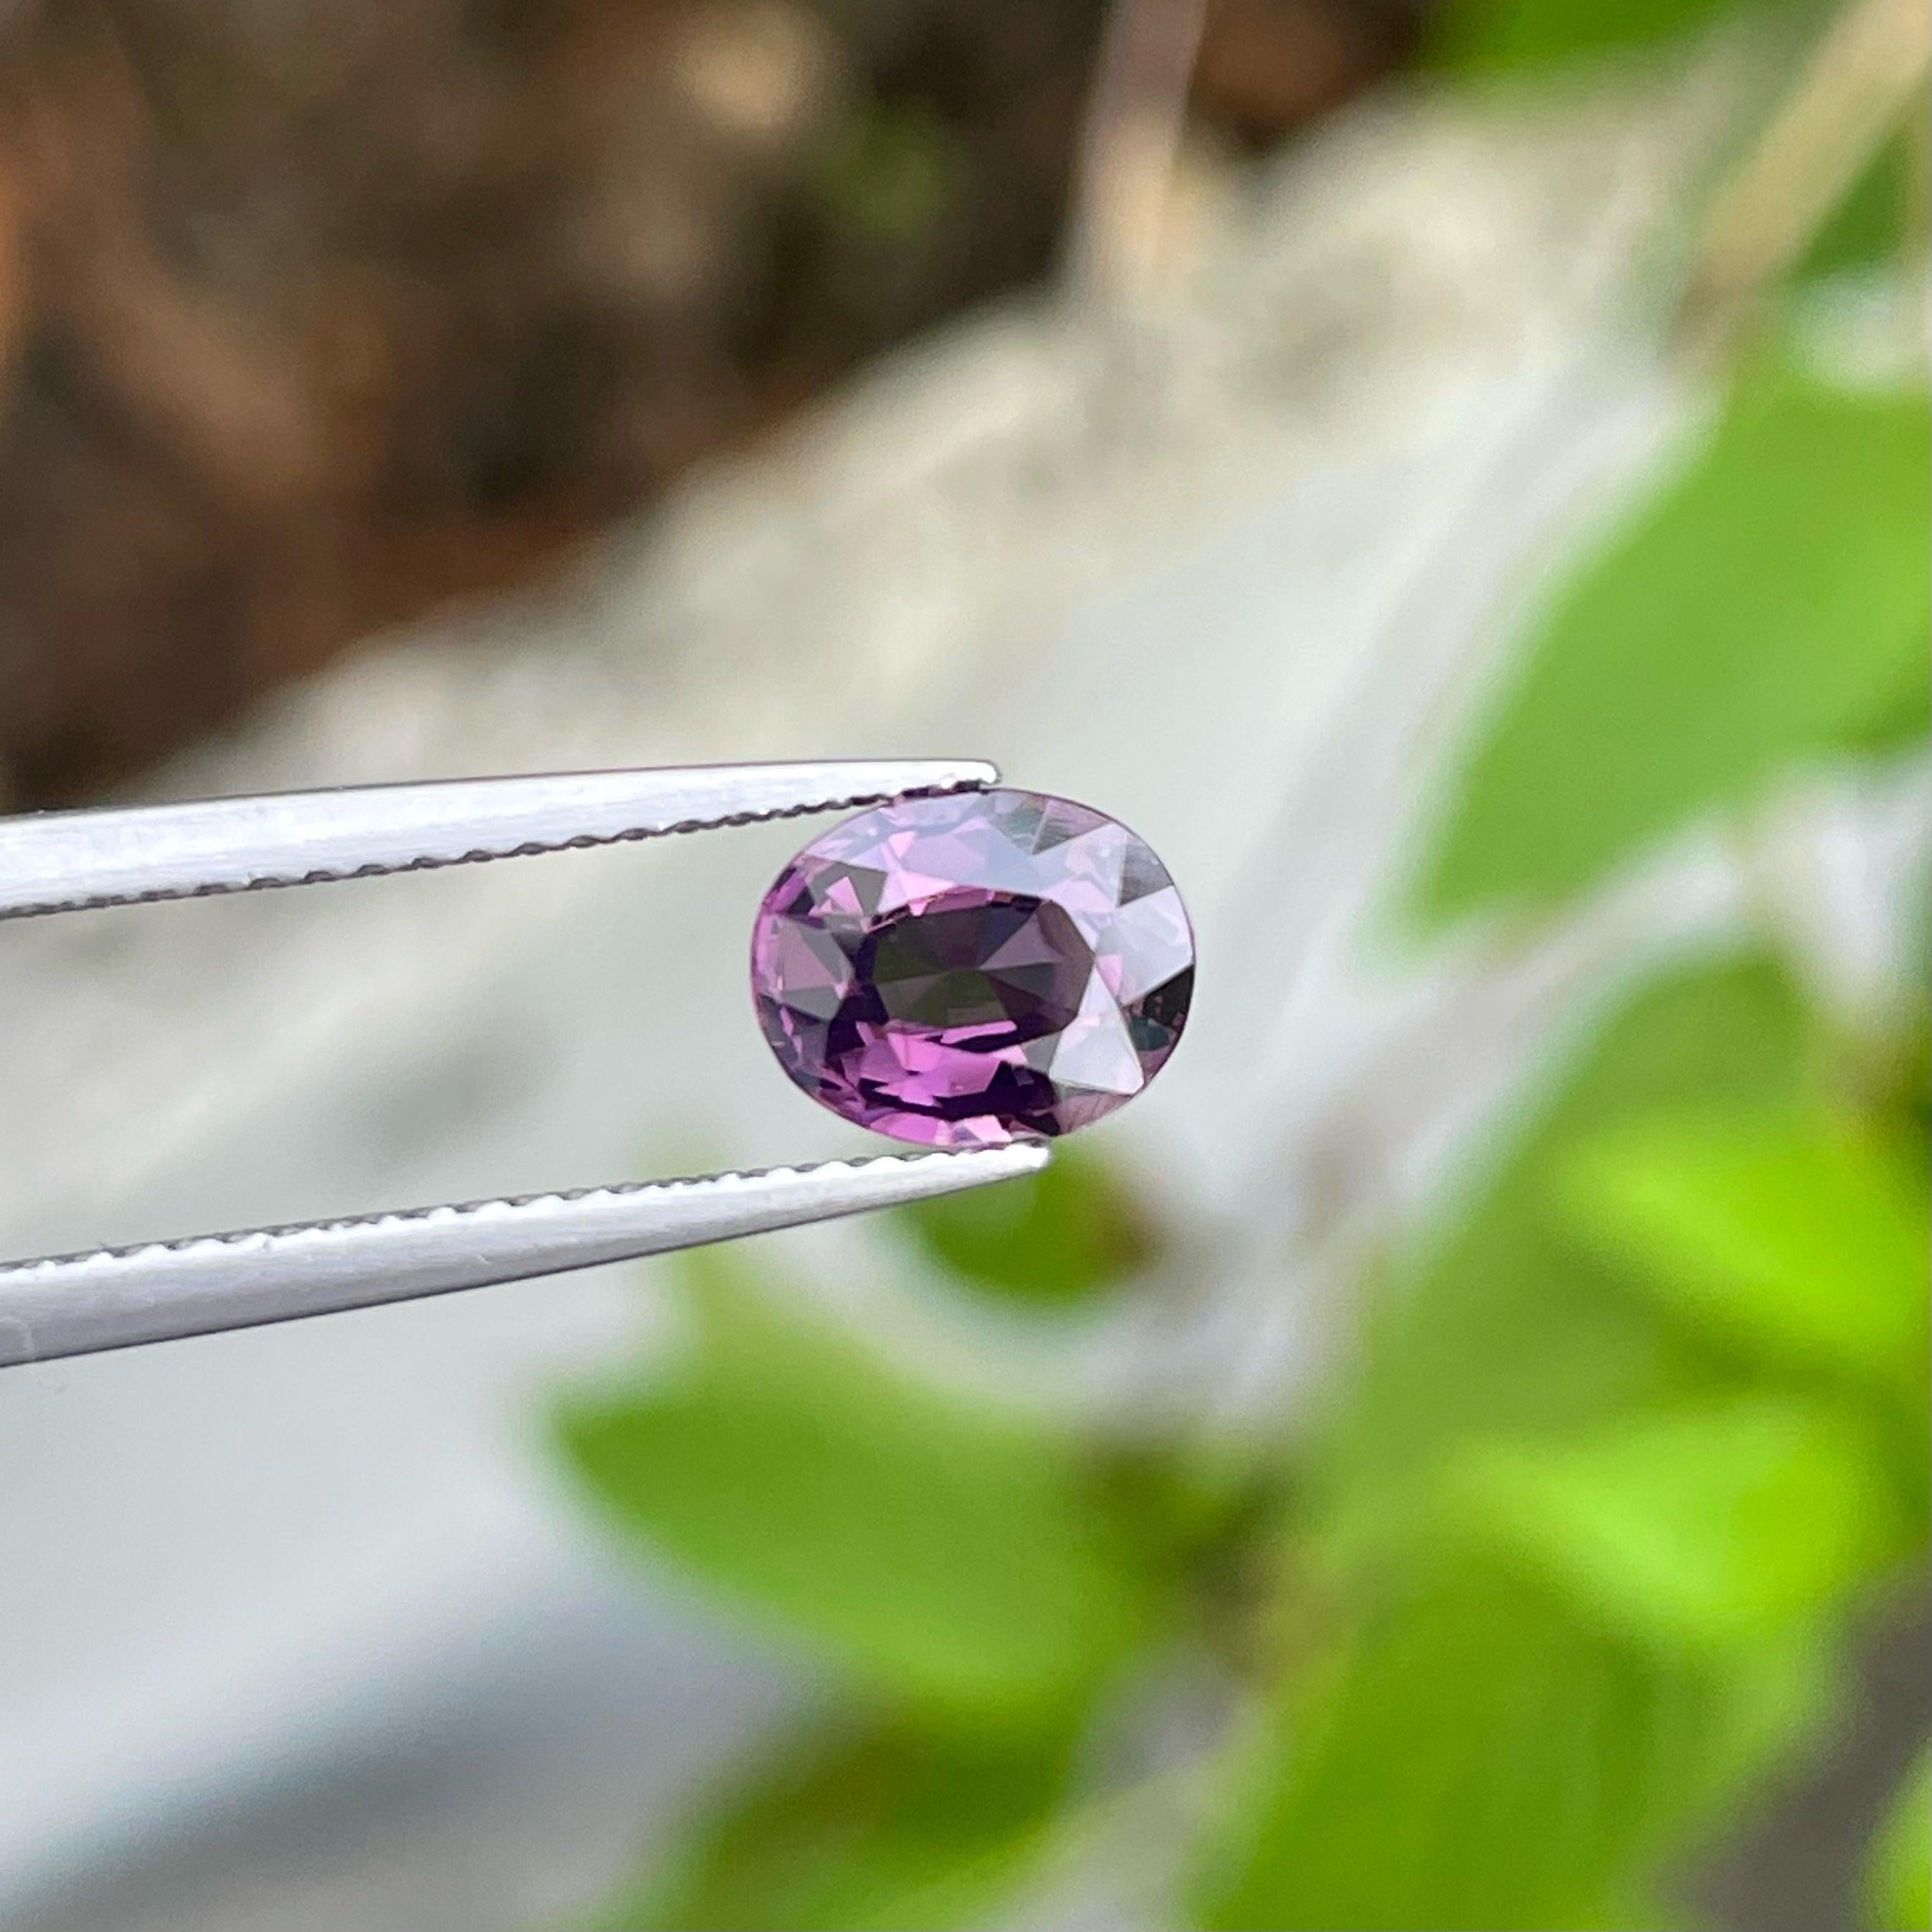 Stunning Natural Purple Spinel Gemstone, Available For Sale At Wholesale Price Natural High Quality 1.17 Carats Pear Shape Natural Spinel from Burma.

Product Information:
GEMSTONE TYPE:	Stunning Natural Purple Spinel Gemstone
WEIGHT:	1.17